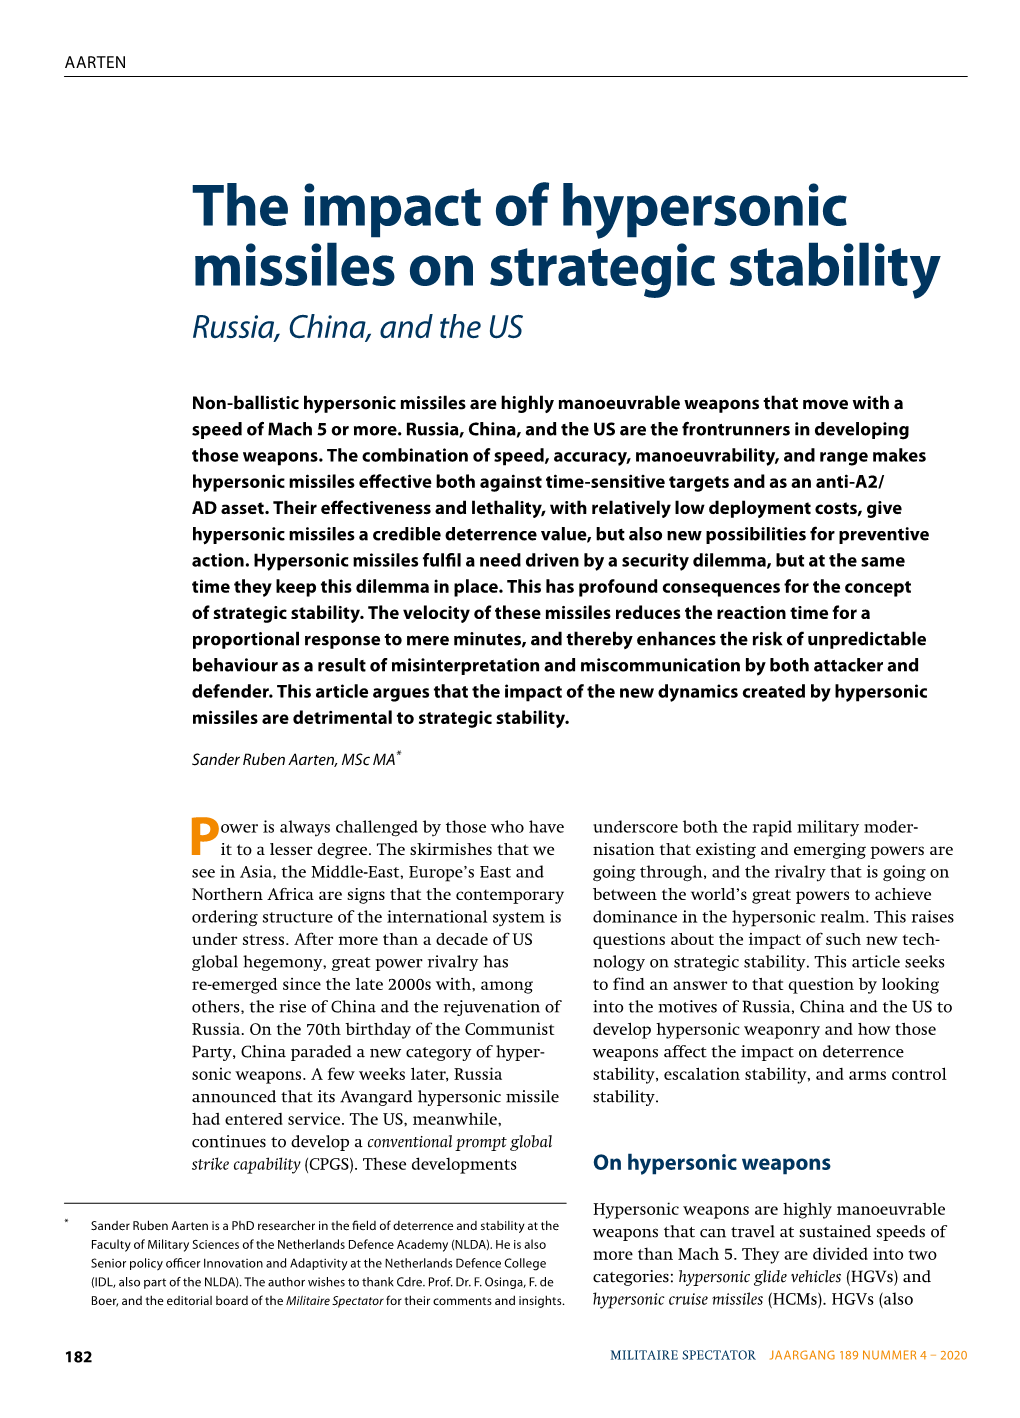 The Impact of Hyper Sonic Missiles on Strategic Stability